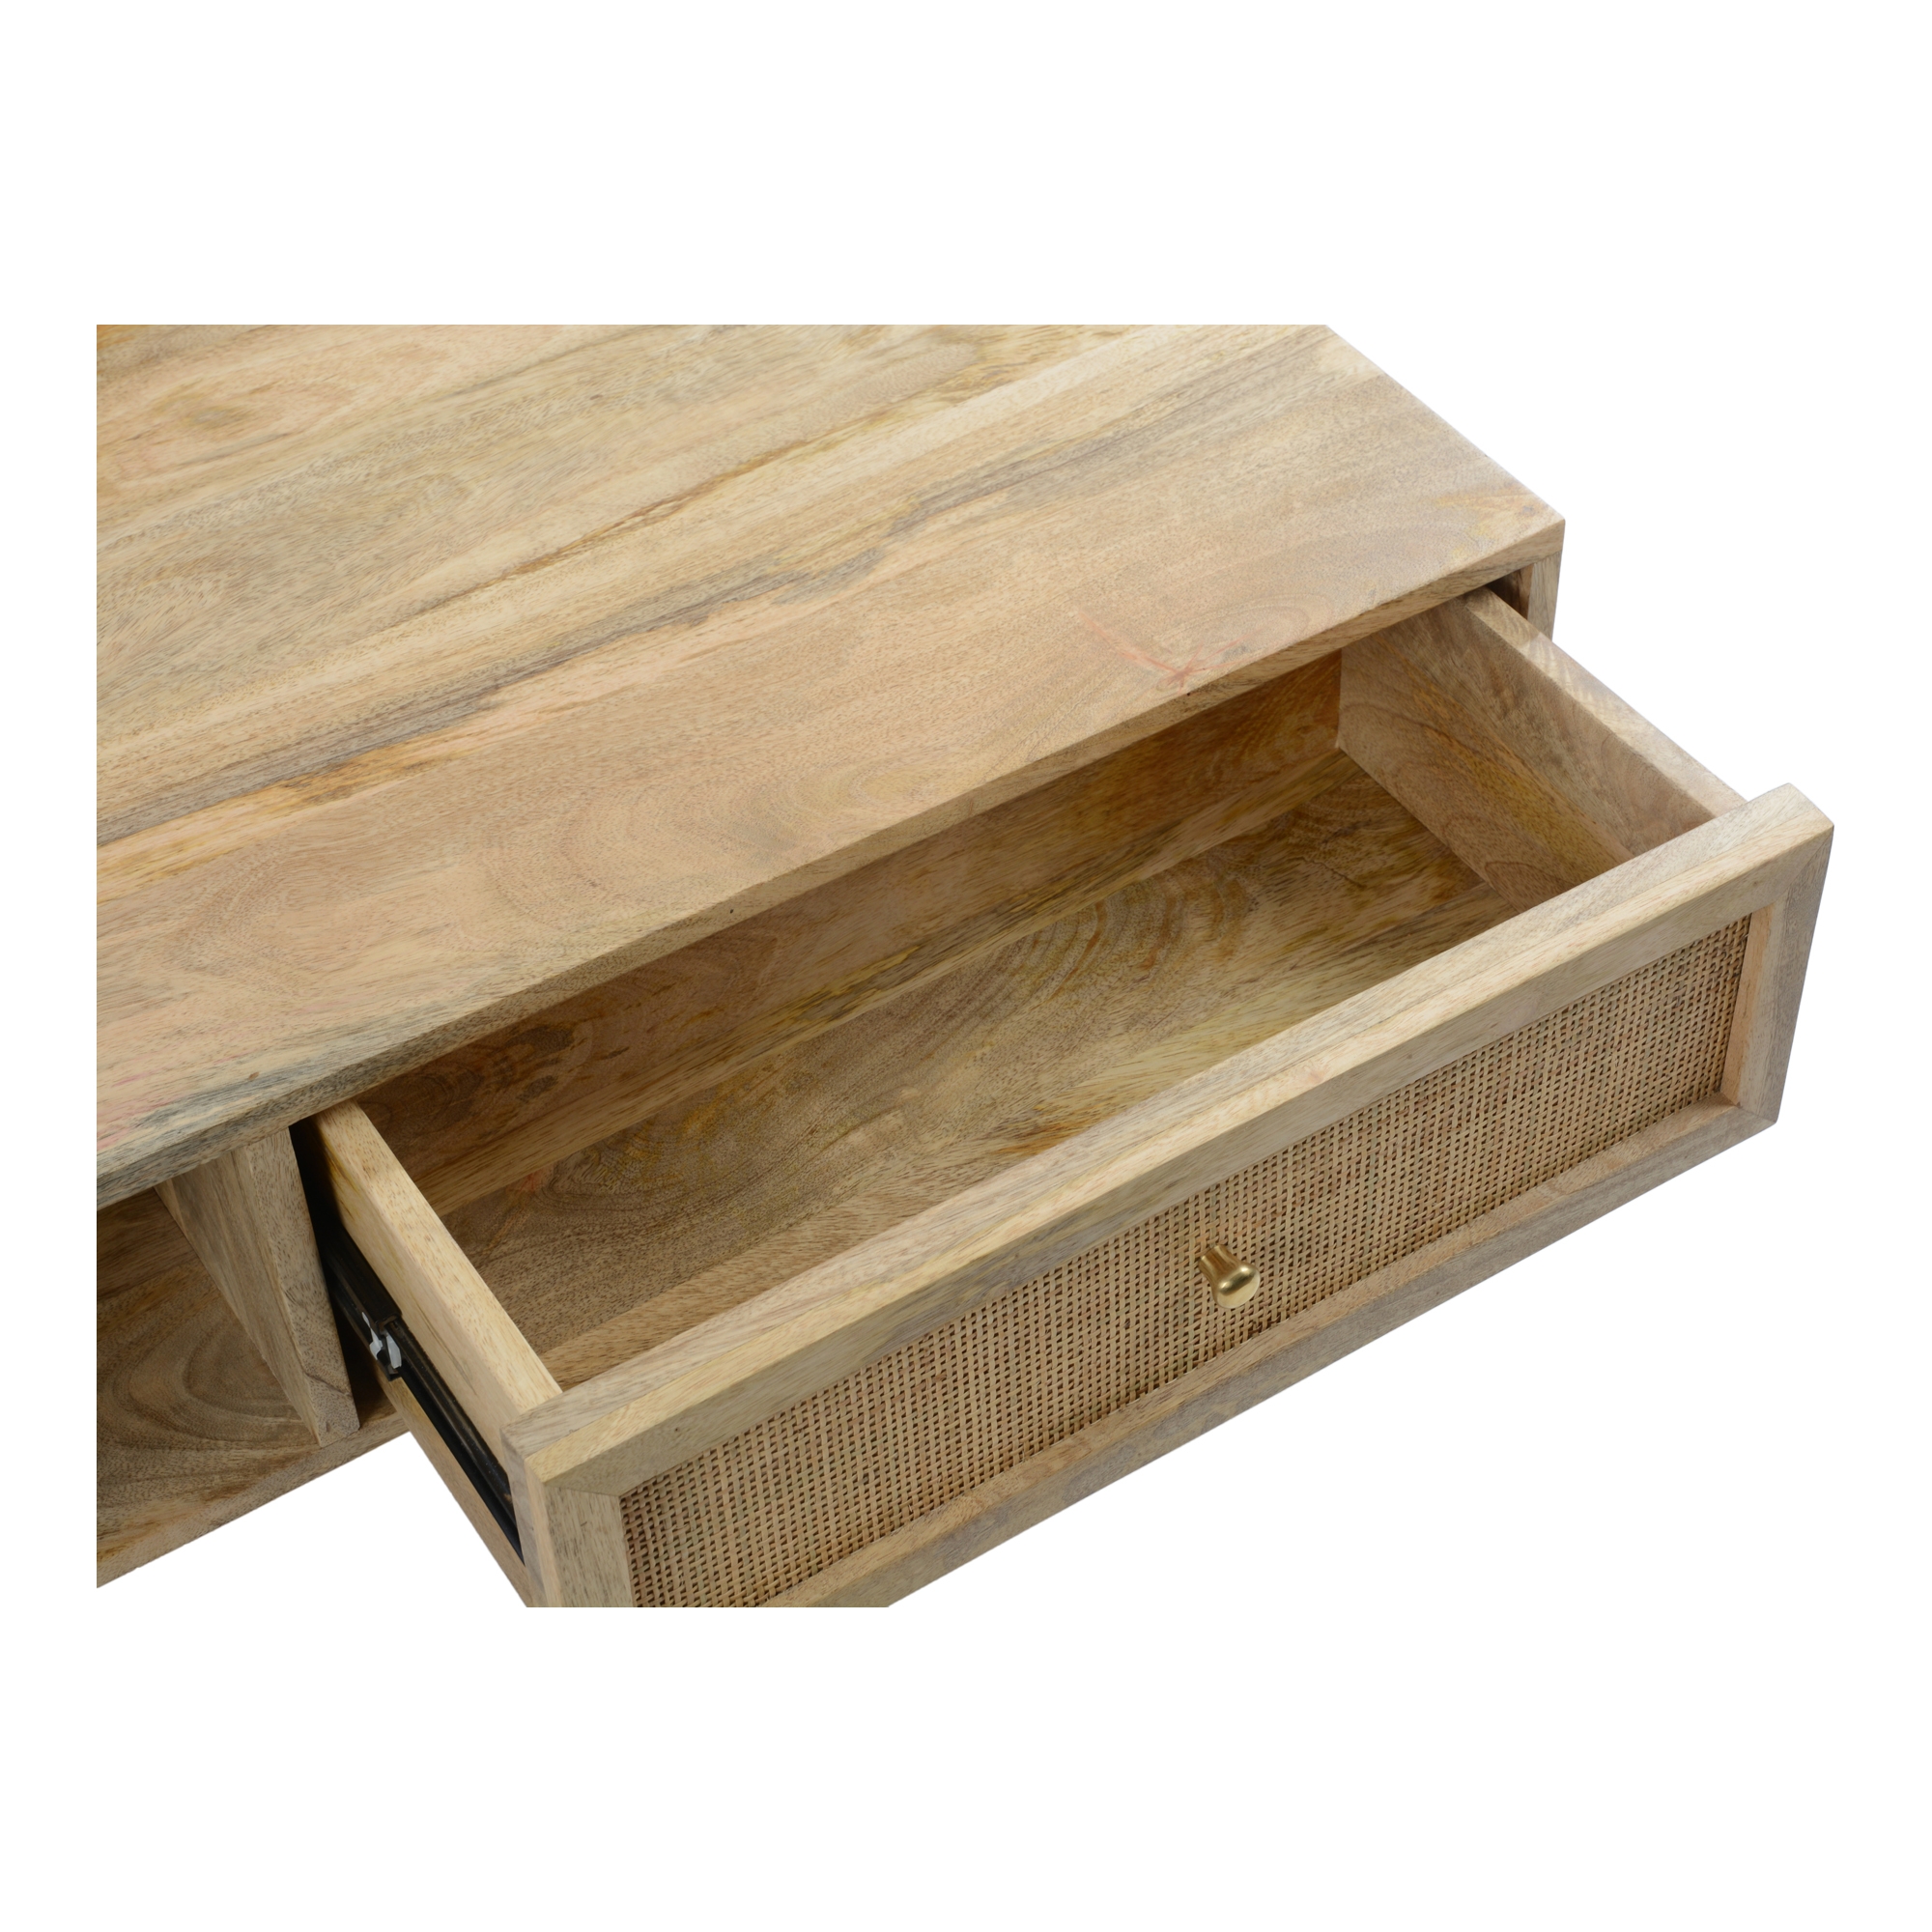 REED COFFEE TABLE - Image 5